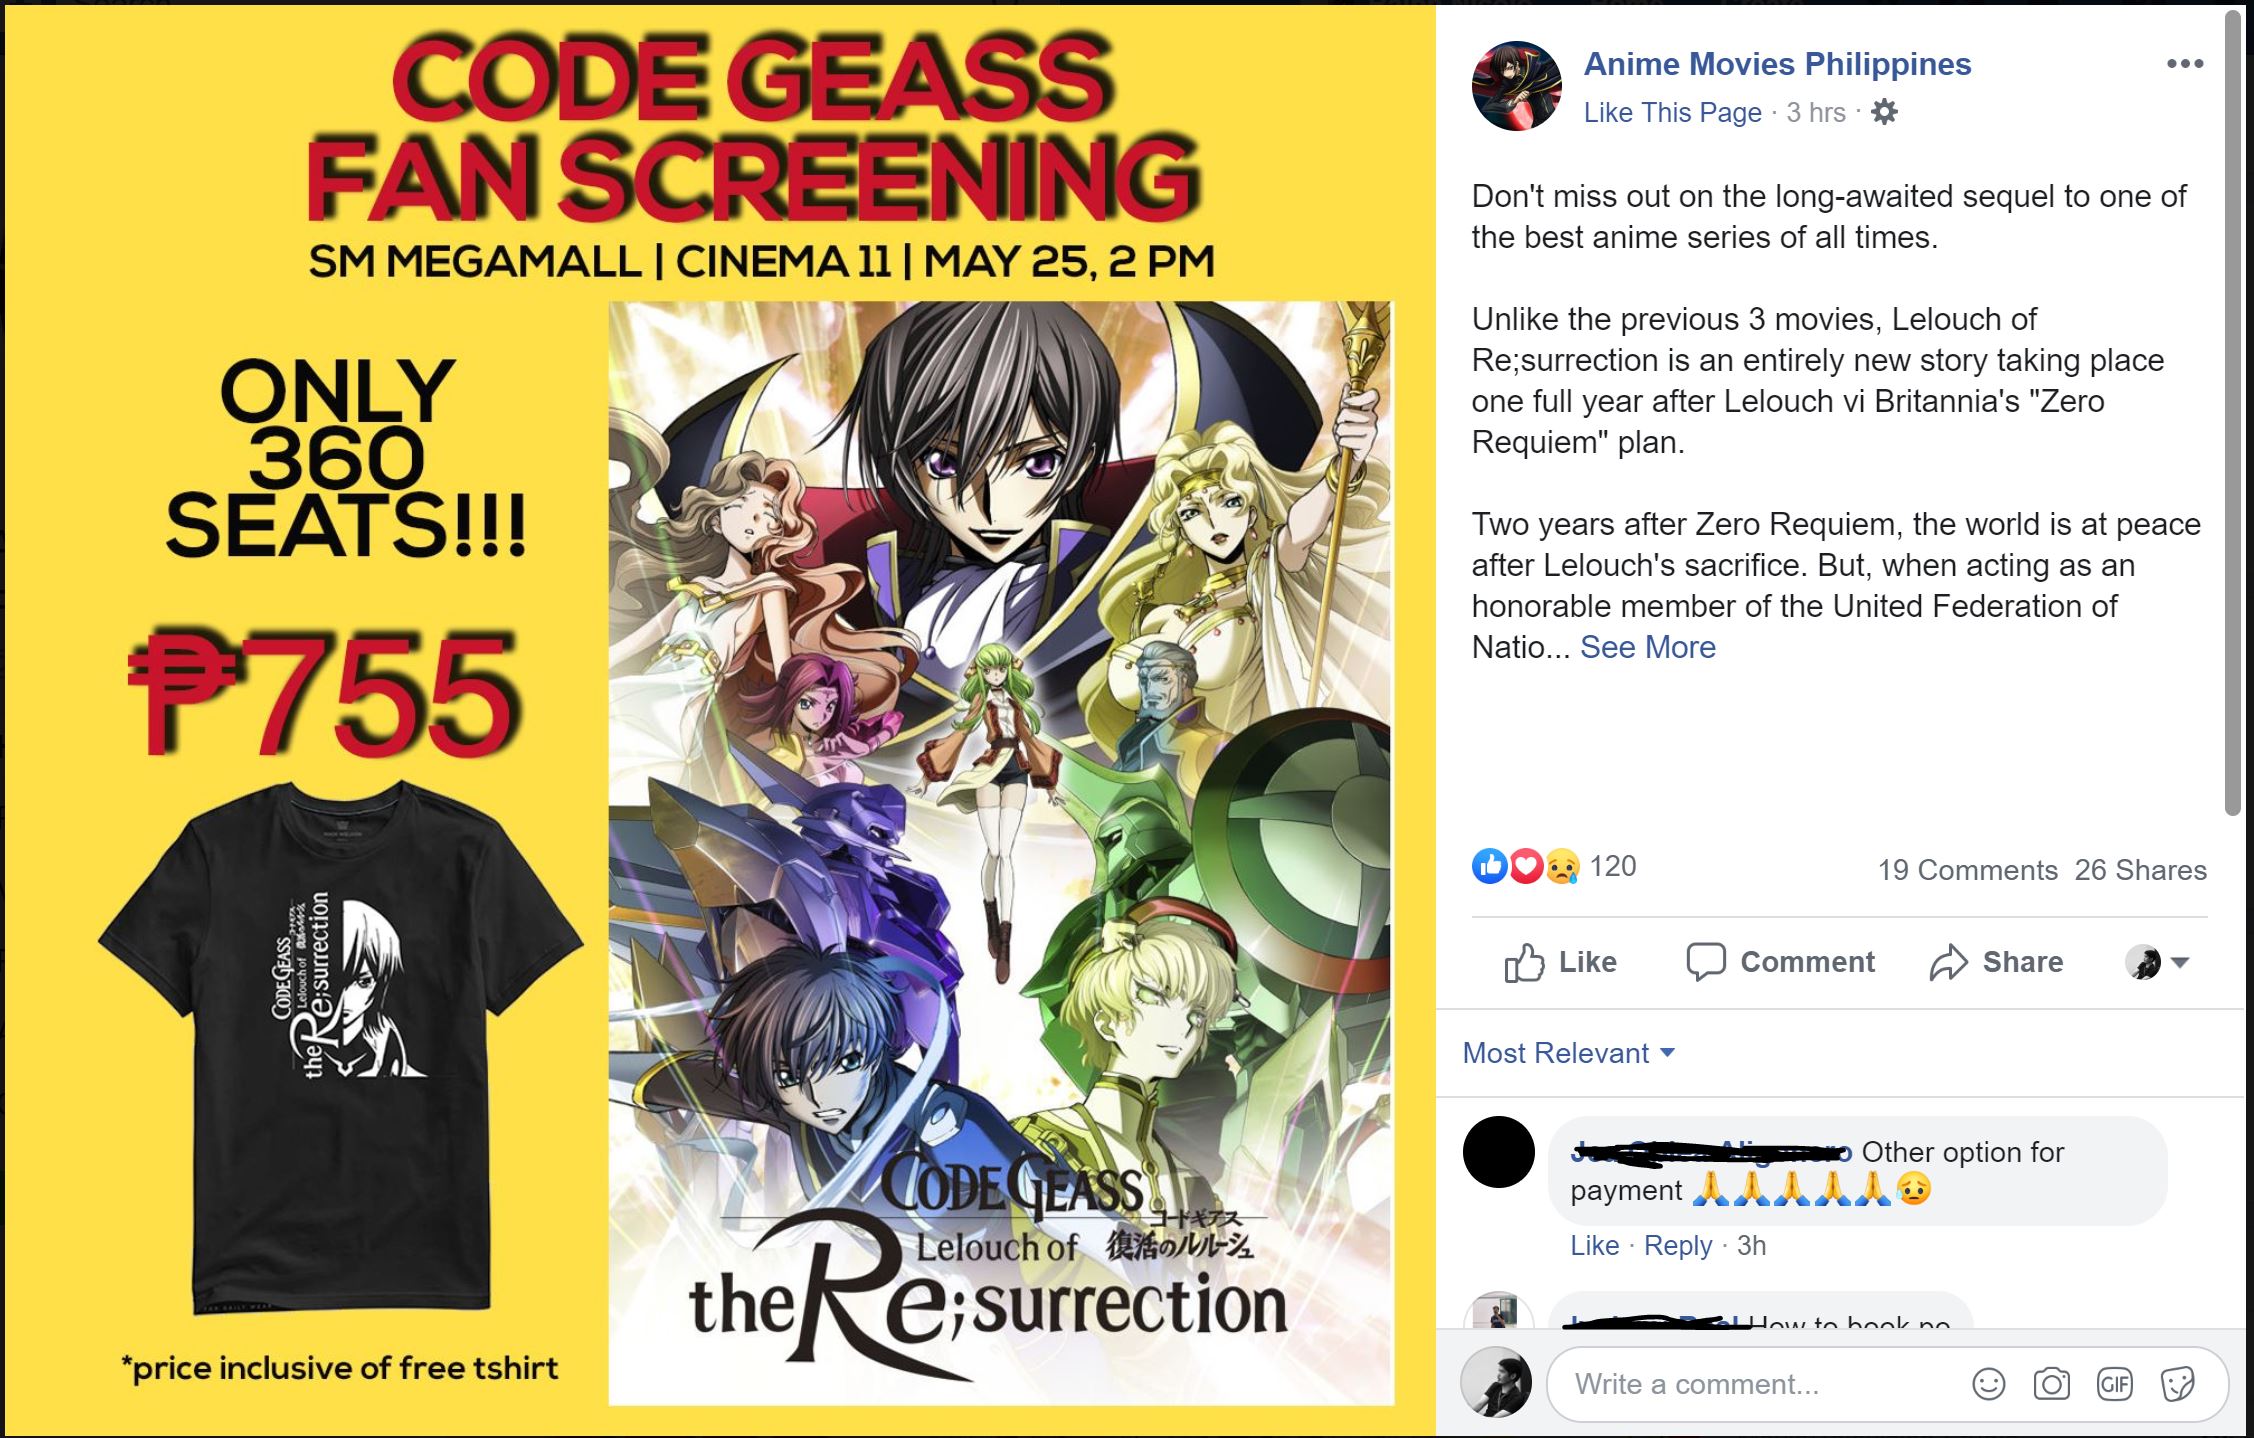 Code Geass Lelouch Of The Re Surrection Gets A Fan Screening This Saturday